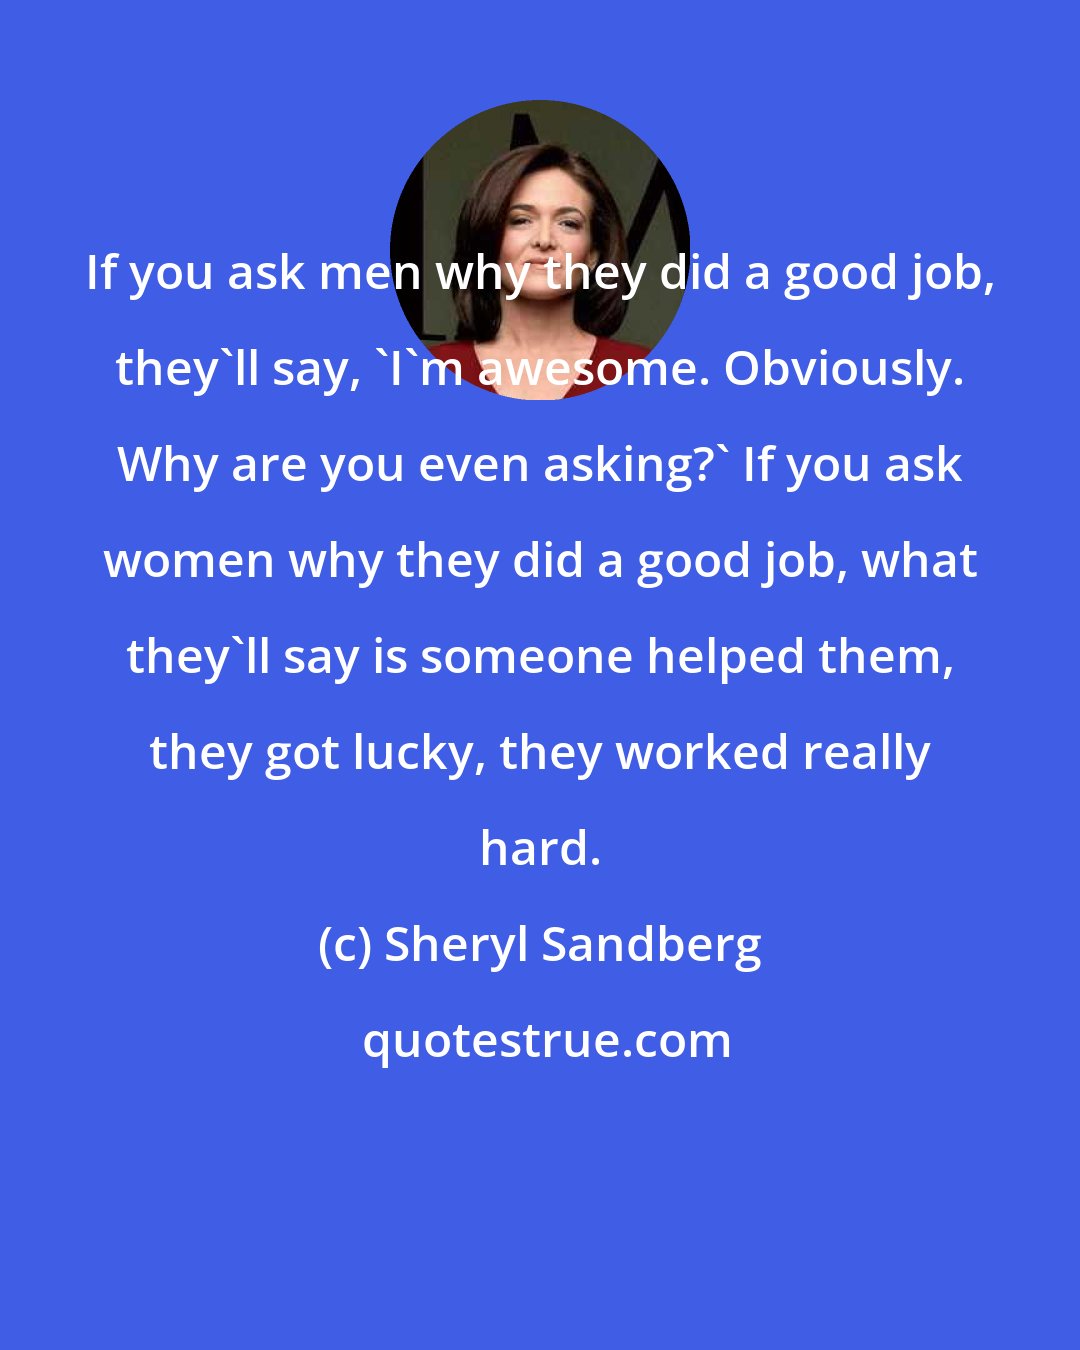 Sheryl Sandberg: If you ask men why they did a good job, they'll say, 'I'm awesome. Obviously. Why are you even asking?' If you ask women why they did a good job, what they'll say is someone helped them, they got lucky, they worked really hard.